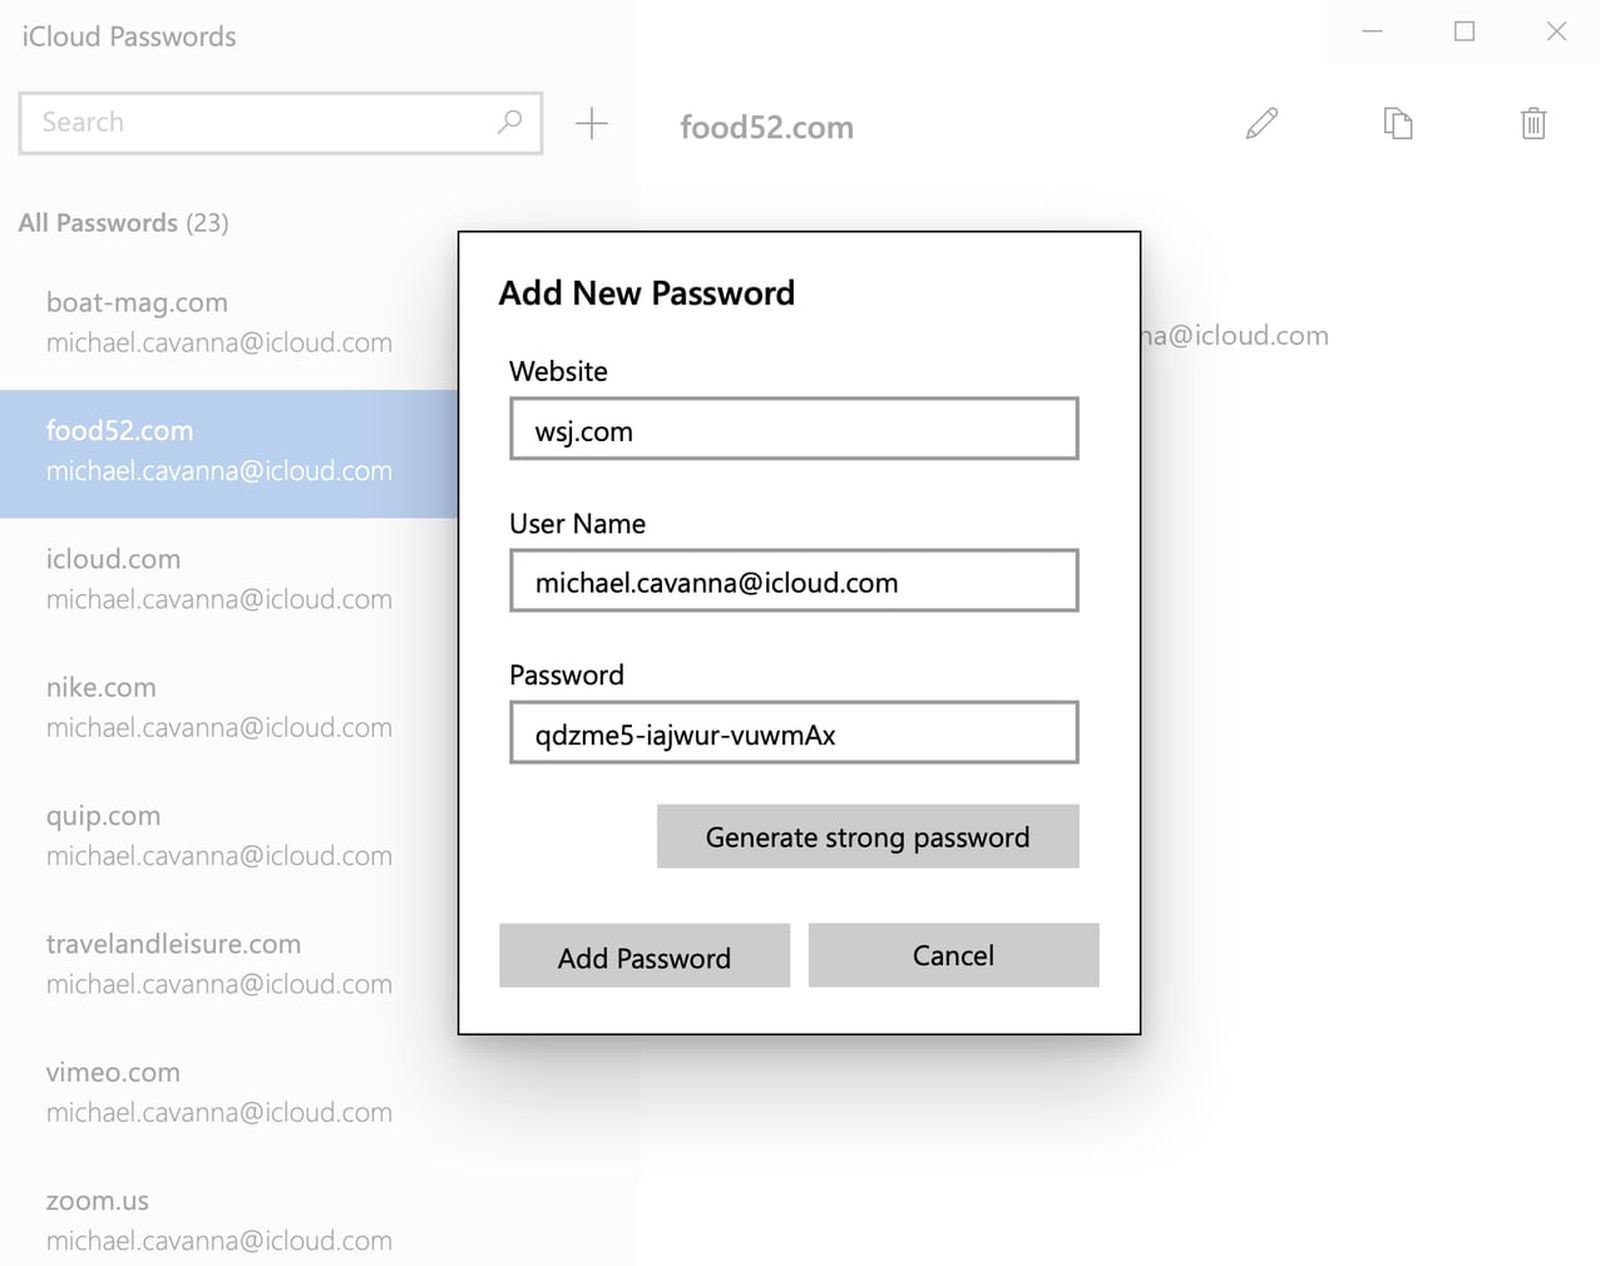 Apple Releases iCloud for Windows 13 With Support for ProRes, ProRAW, and Strong Password Generation